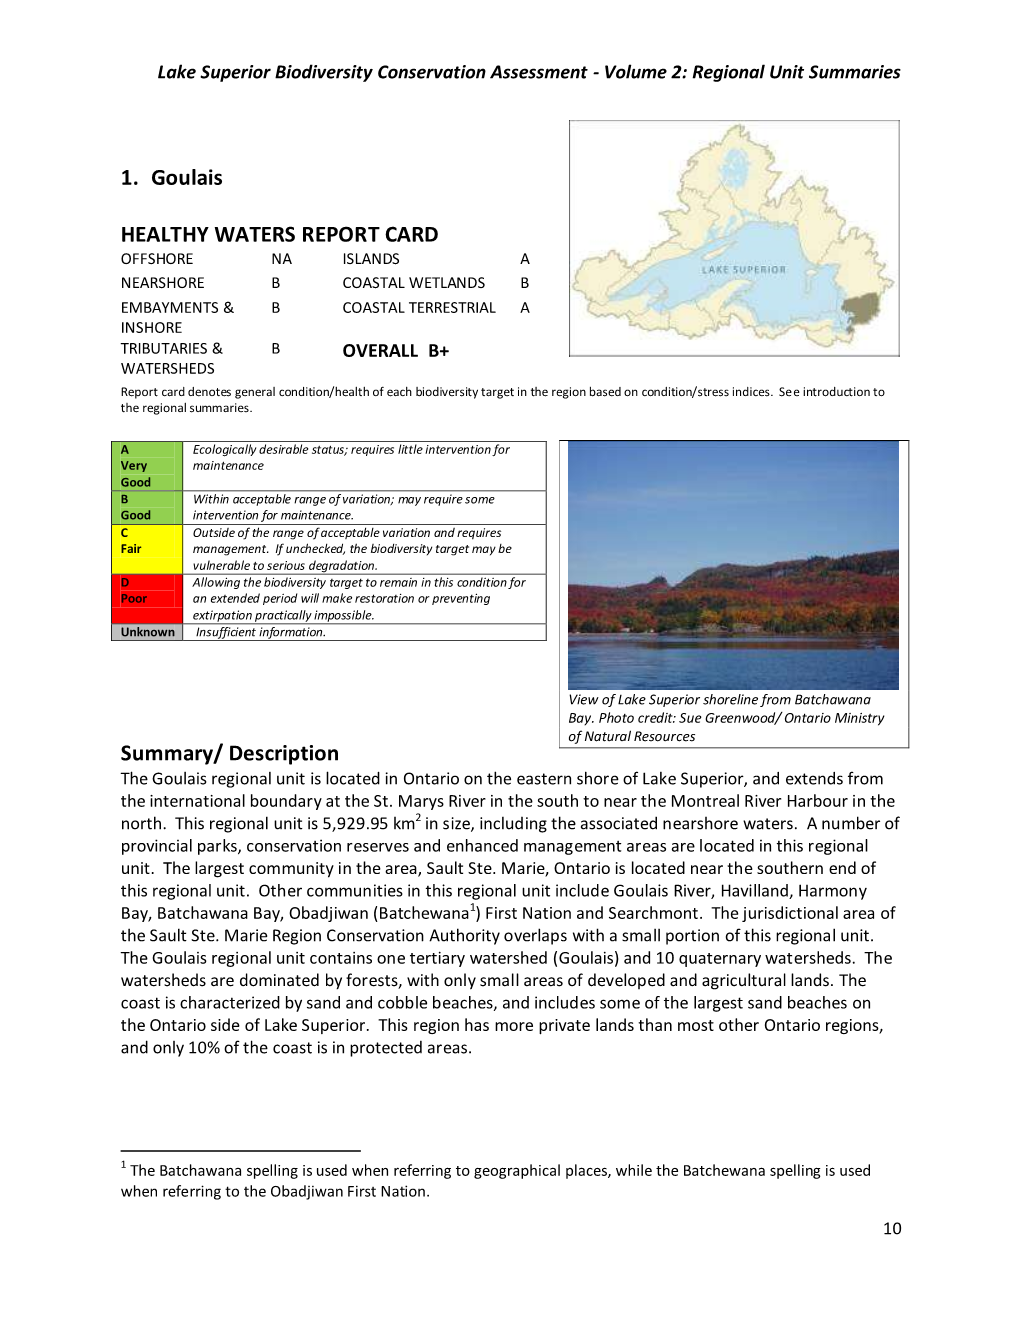 1. Goulais HEALTHY WATERS REPORT CARD Summary